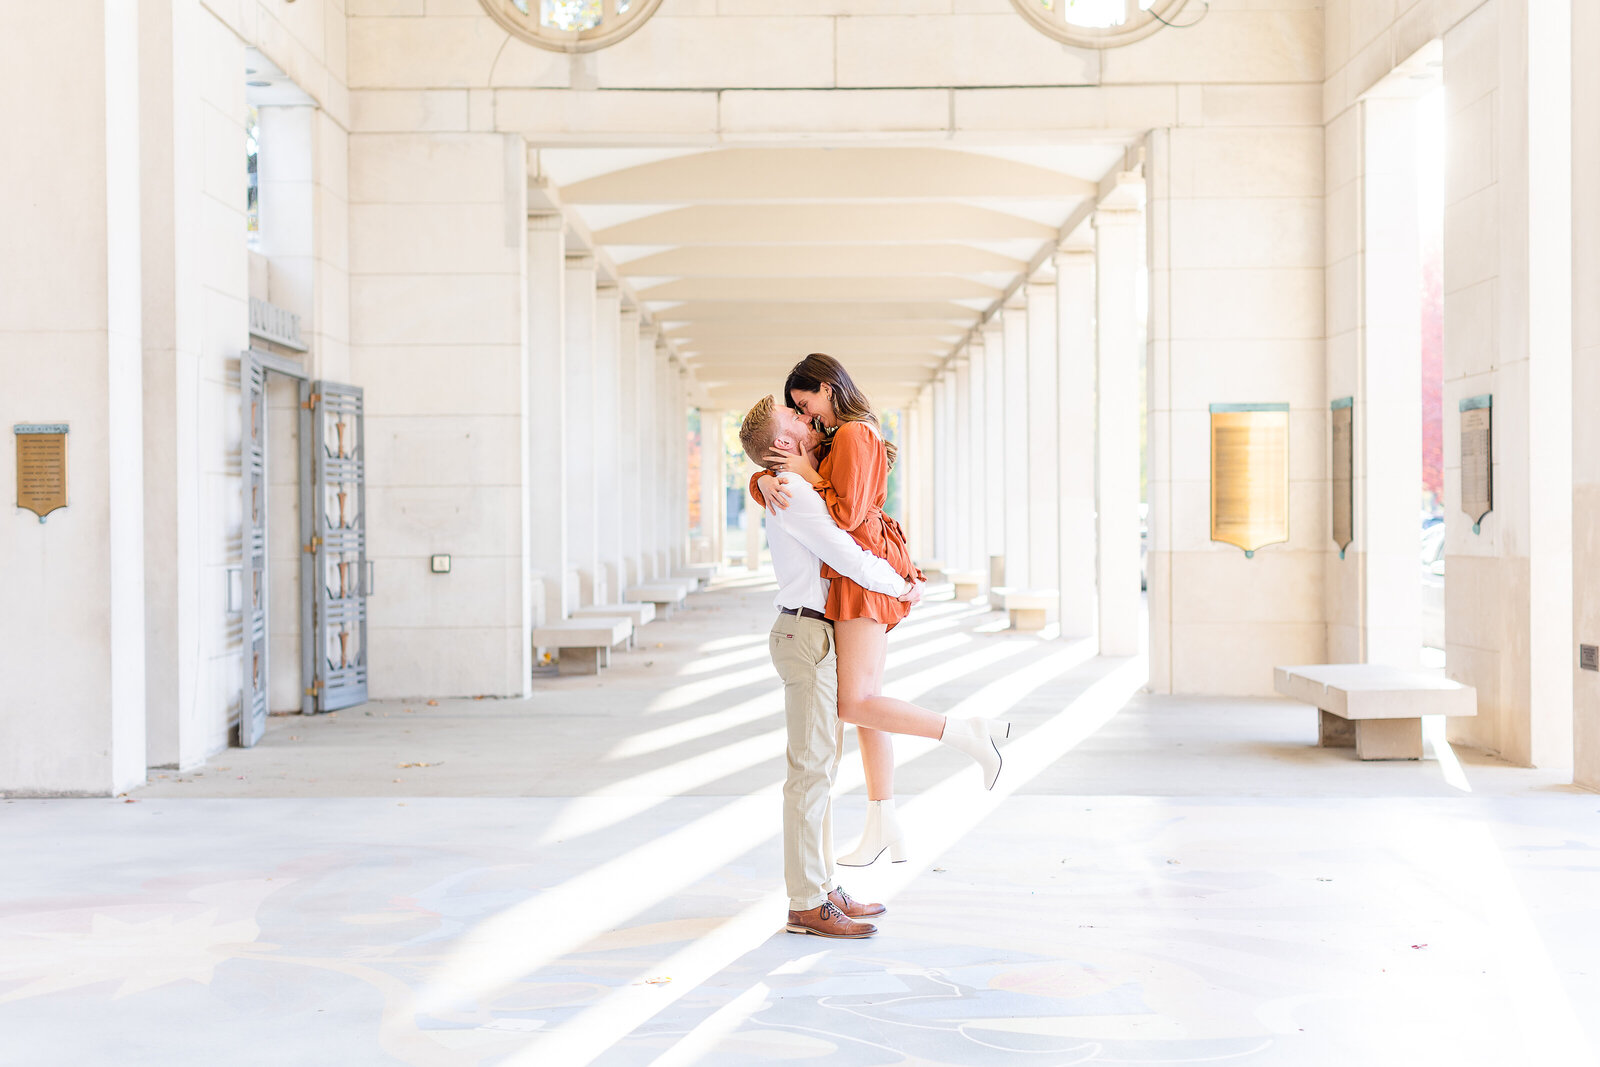 Art hill engagement session photographer, Forest Park engagement session St. Louis MO, The Muny engagement session st. louis mo